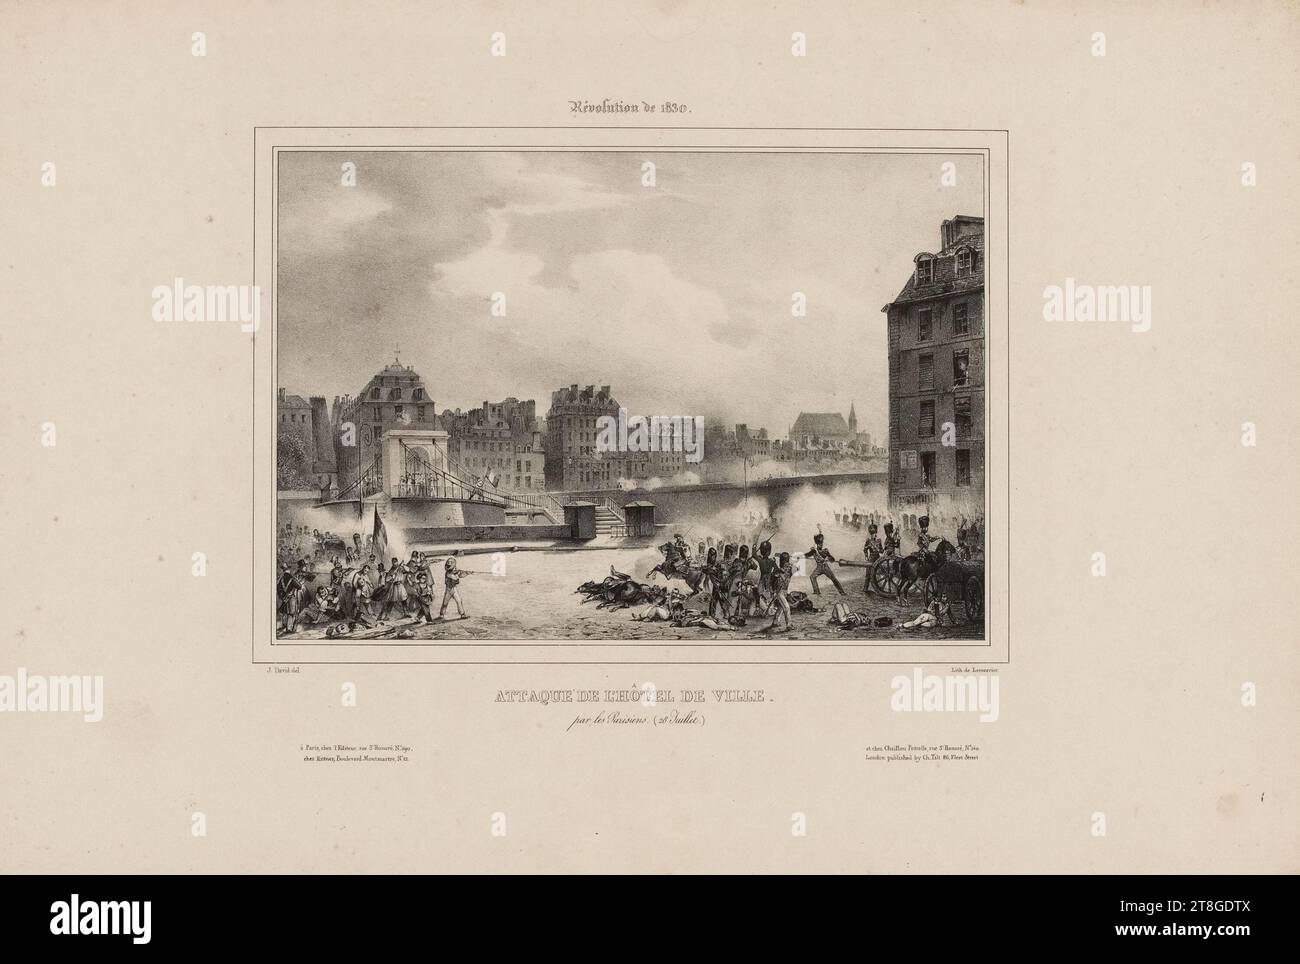 Revolution of 1830, Attack of the Town Hall, by the Parisians (July 28), Engraver, David, Jules, Author of the model, Lemercier, Charles Nicolas, Printer-lithographer, Rittner, Henri, Editor, Chaillou-Potrelle, Editor, Tilt or Thilt, Charles, Editor, Circa 1830, Print, Graphic arts, Print, Lithography, Dimensions - Work: Height: 31 cm, Width: 46. 5 cm, Dimensions - Mounting:, Height: 32.6 cm, Width: 49 cm Stock Photo